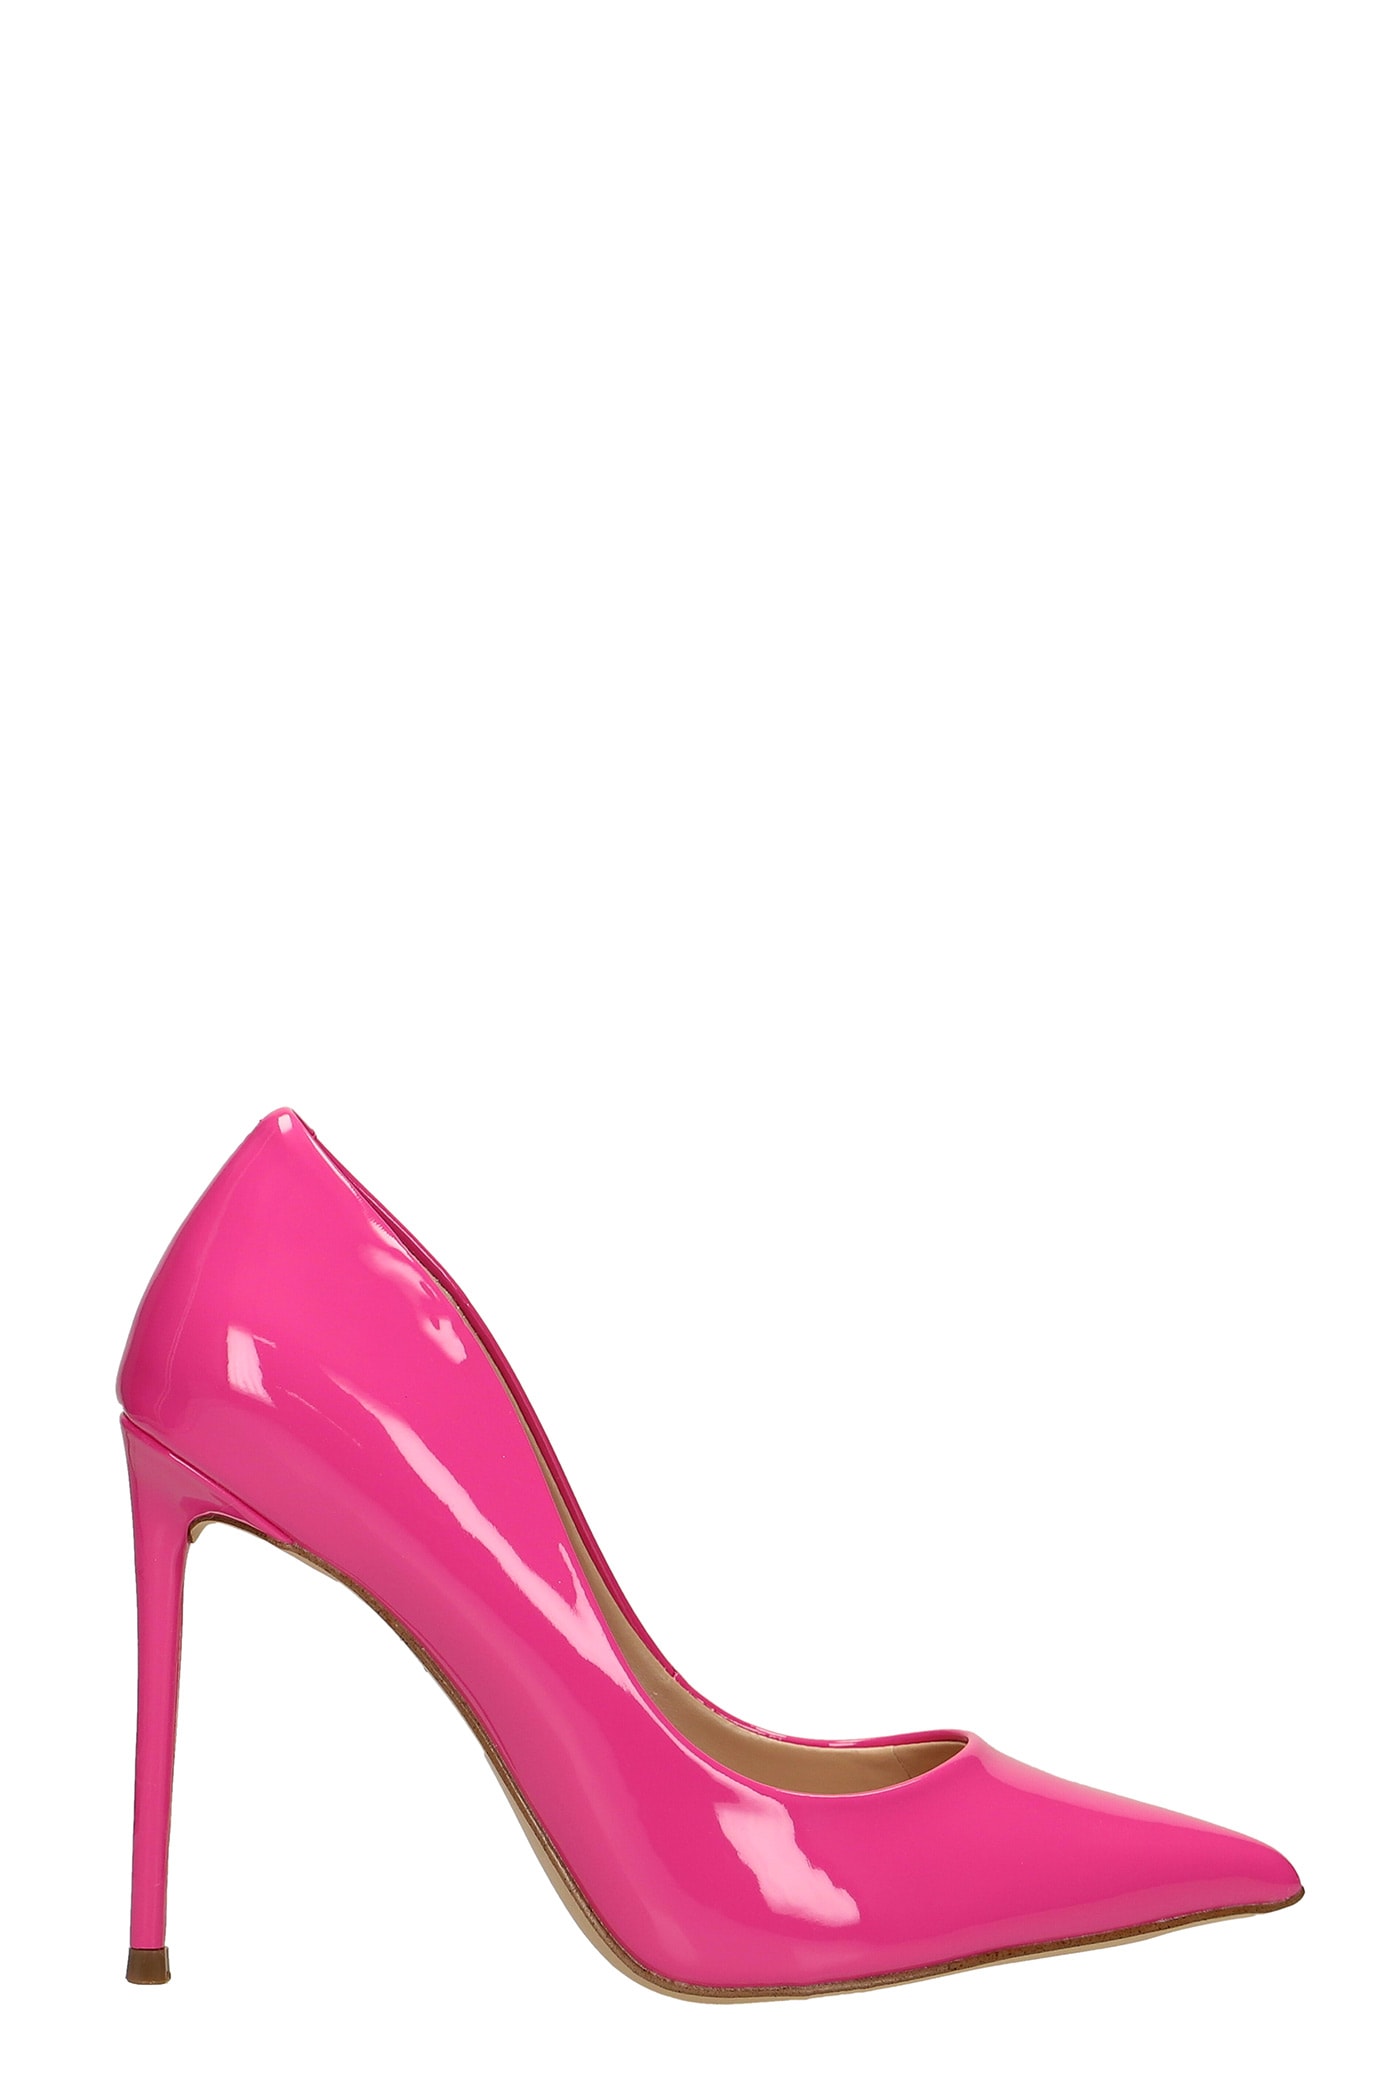 Steve Madden Vala Pumps In Fuxia Patent Leather